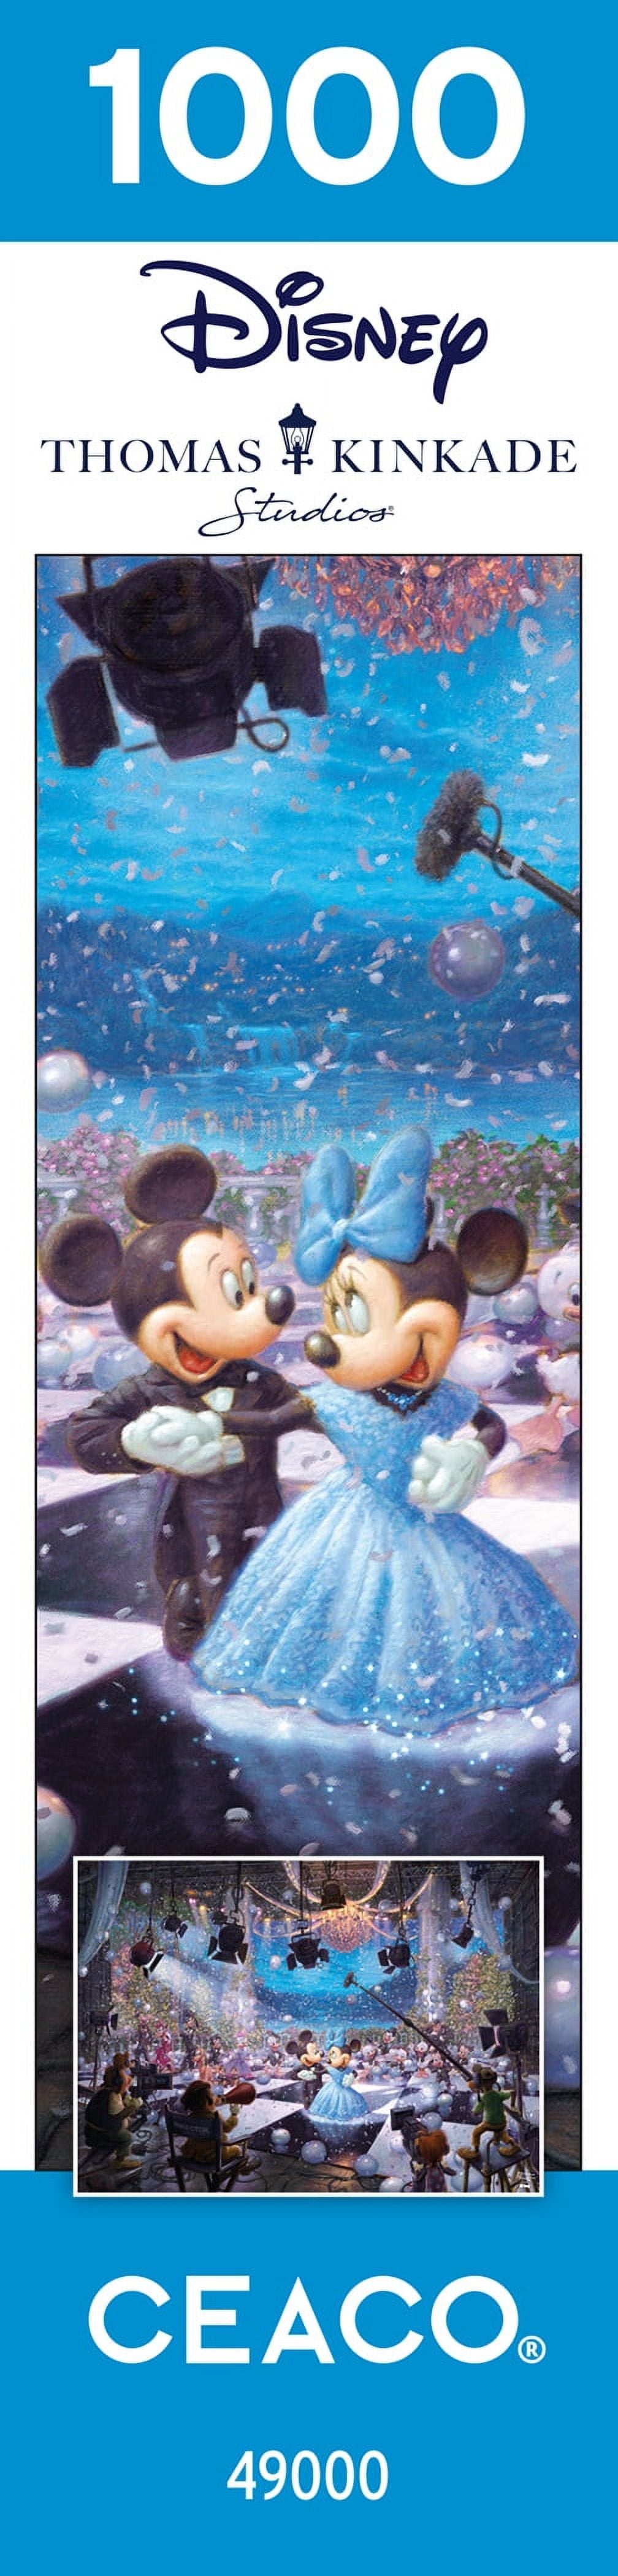 1000 piece jigsaw puzzle Disney 100 years Anniversary Design (Expedited  Shipping